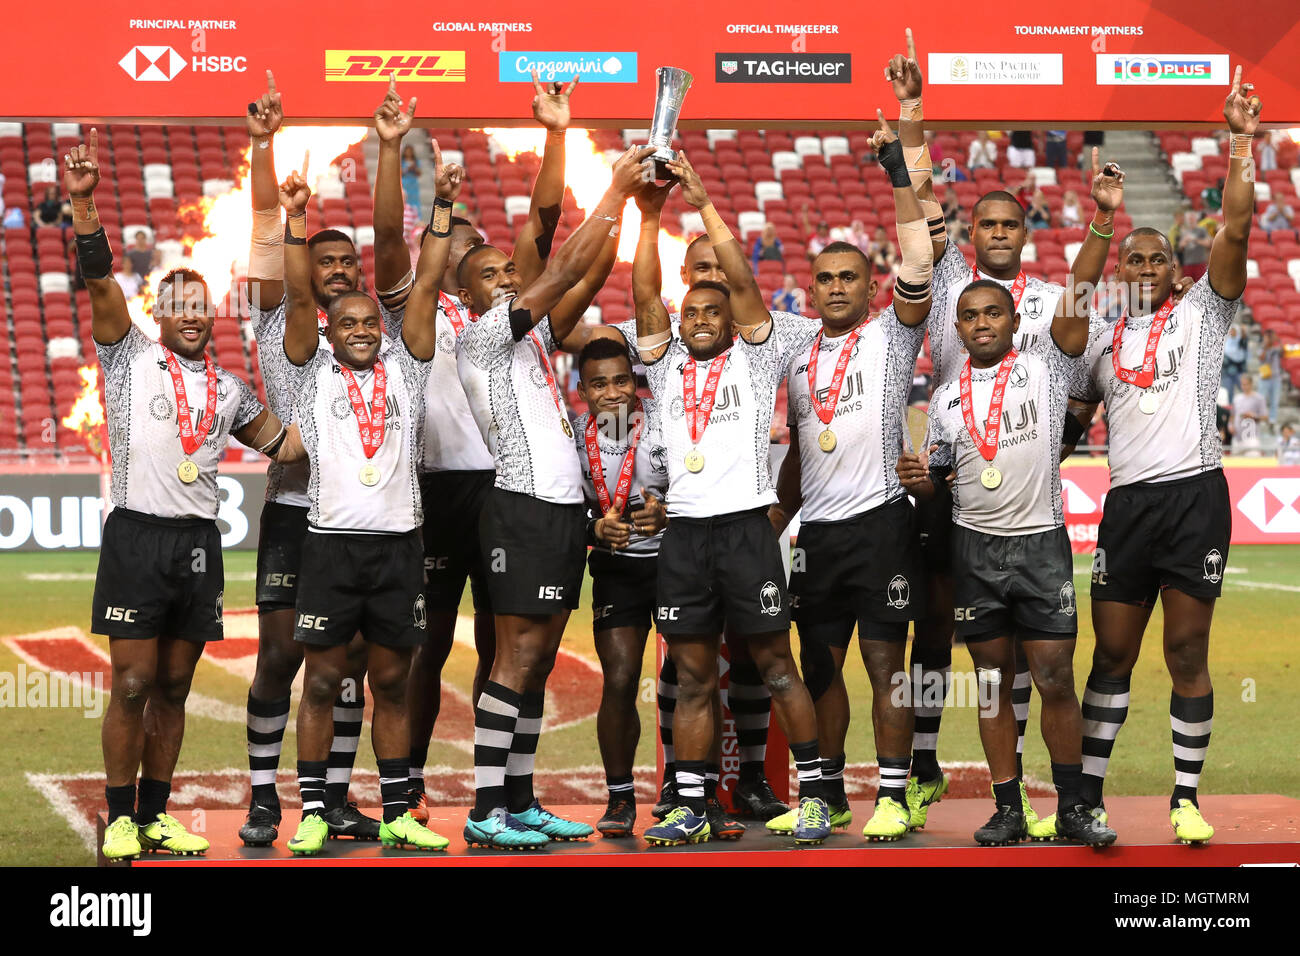 Singapore. 29th Apr, 2018. Fijian players celebrate after winning the Cup Final match between Fiji and Australia at the Rugby Sevens tournament at the National Stadium. Singapore. Credit: Paul Miller/ZUMA Wire/Alamy Live News Stock Photo